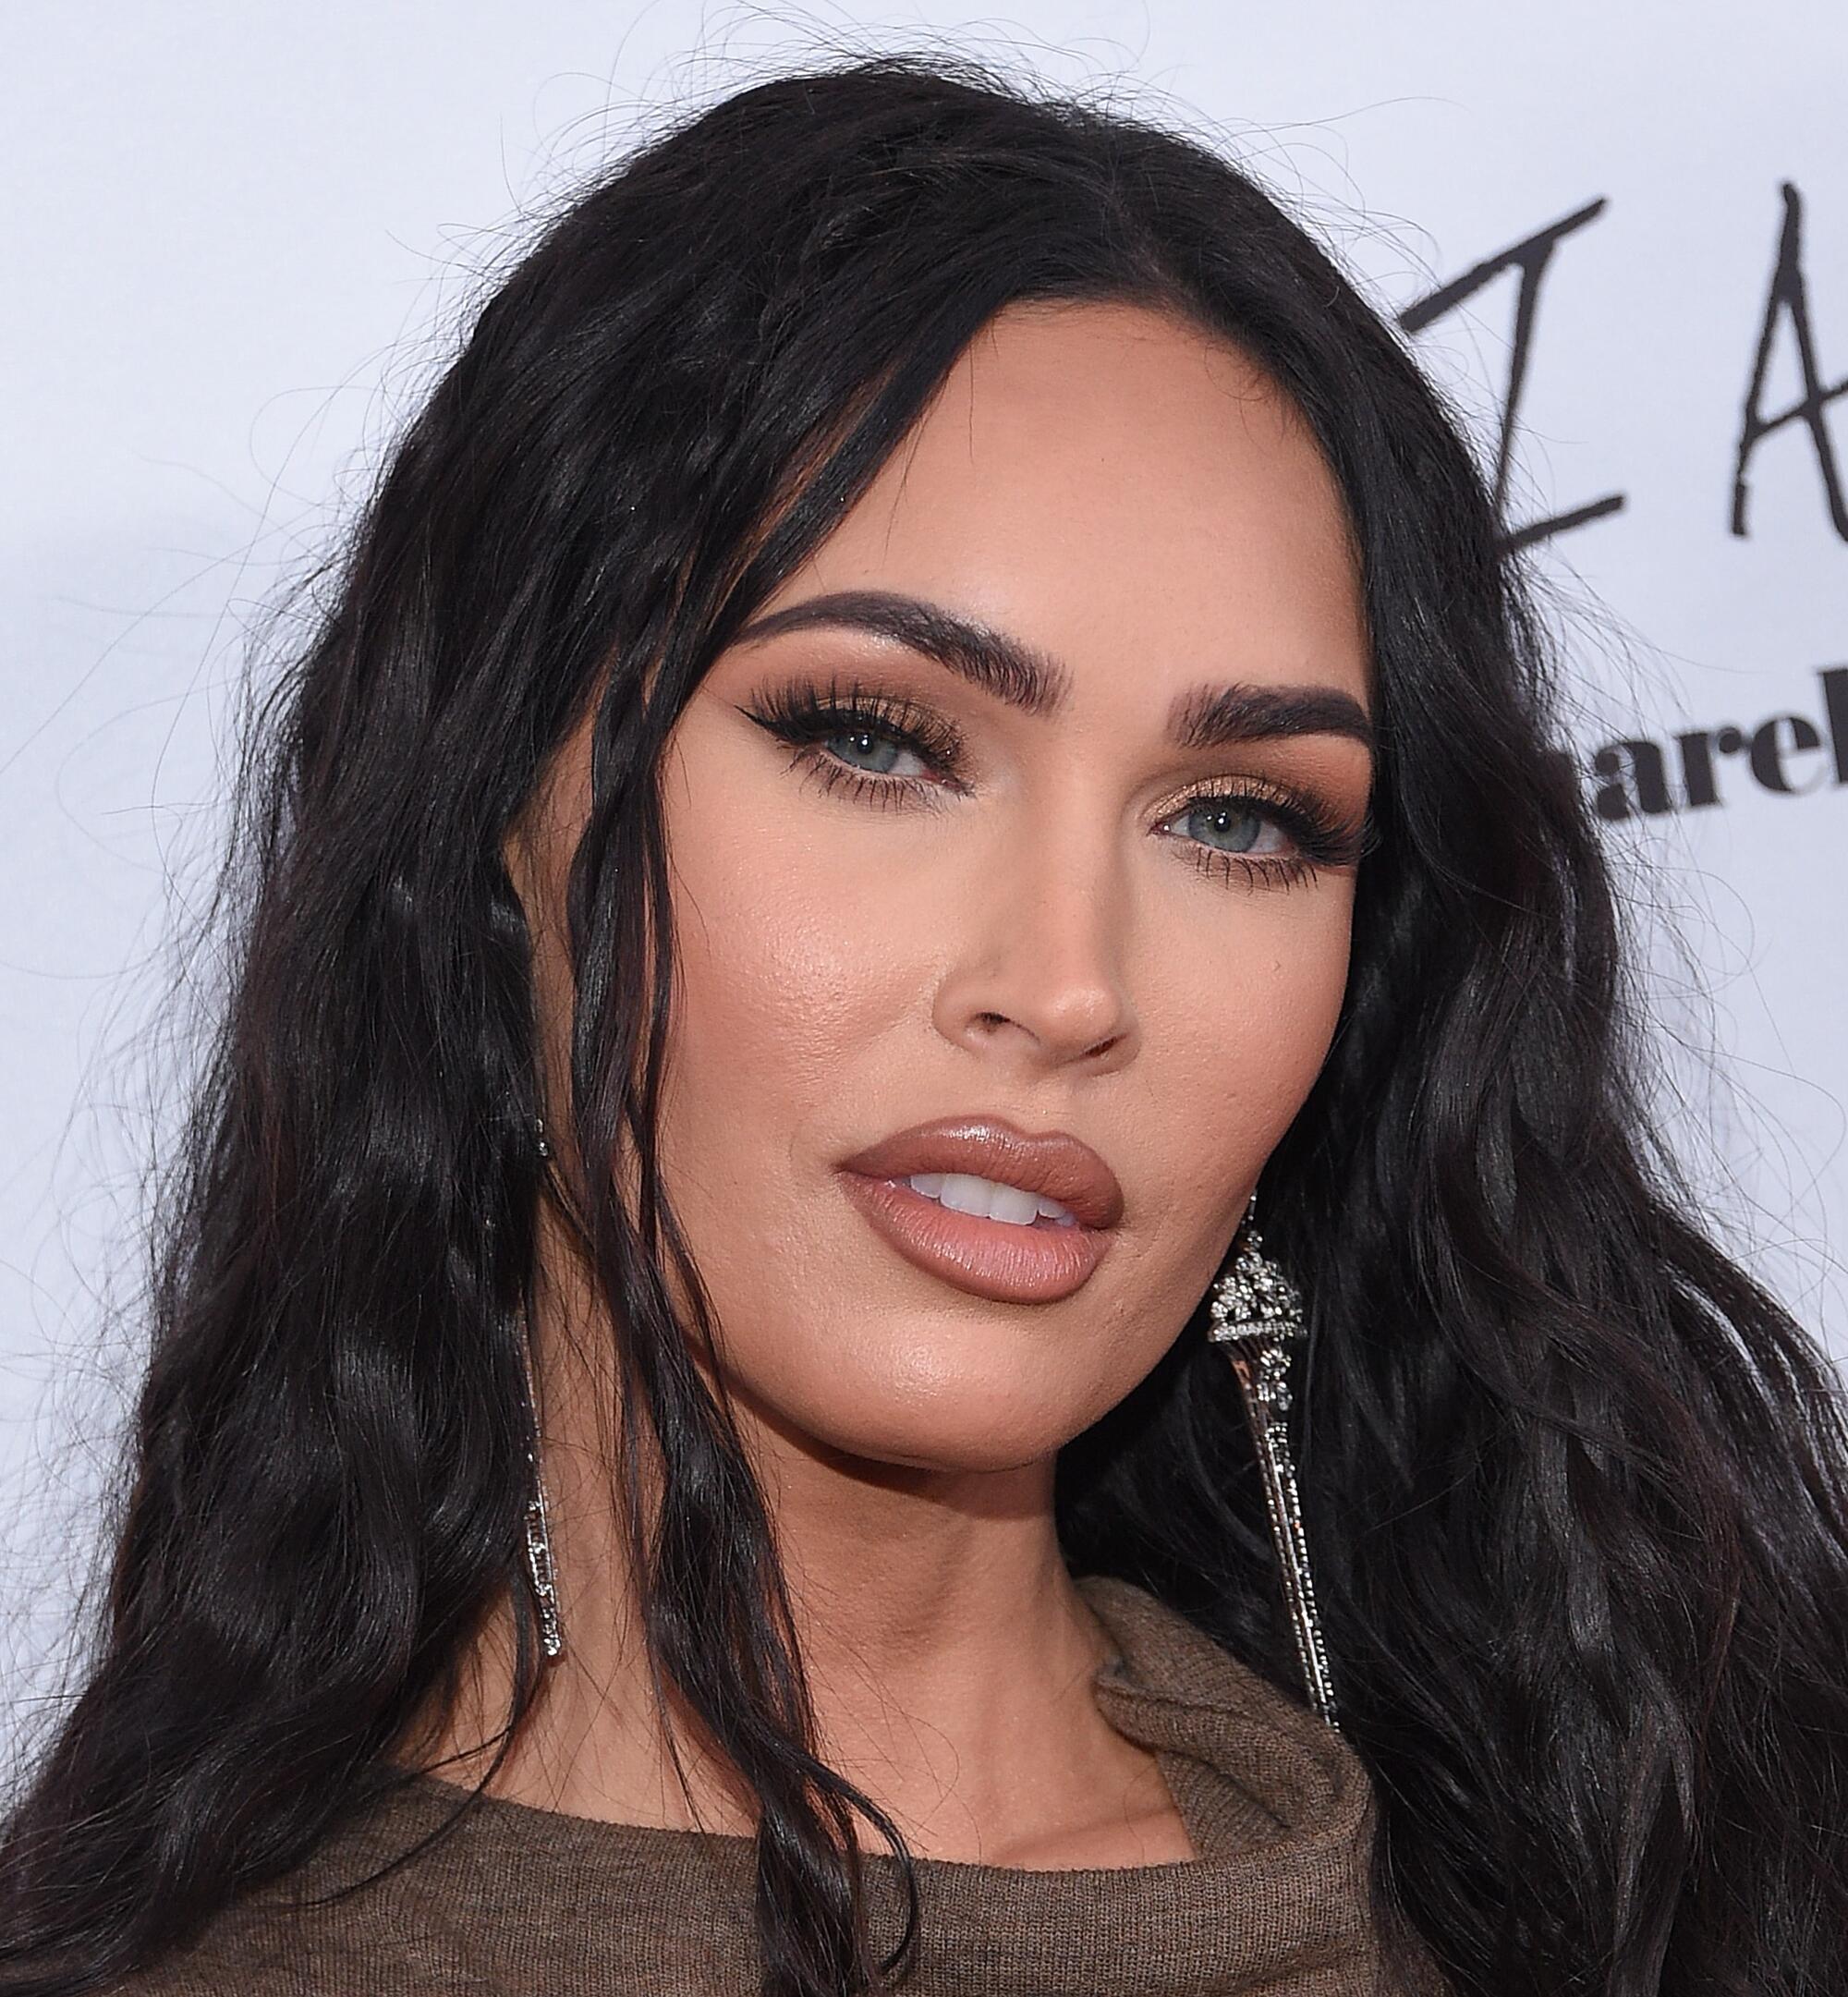 Report: Megan Fox Gets Slammed Into Barricade As Man Tries To Punch ...